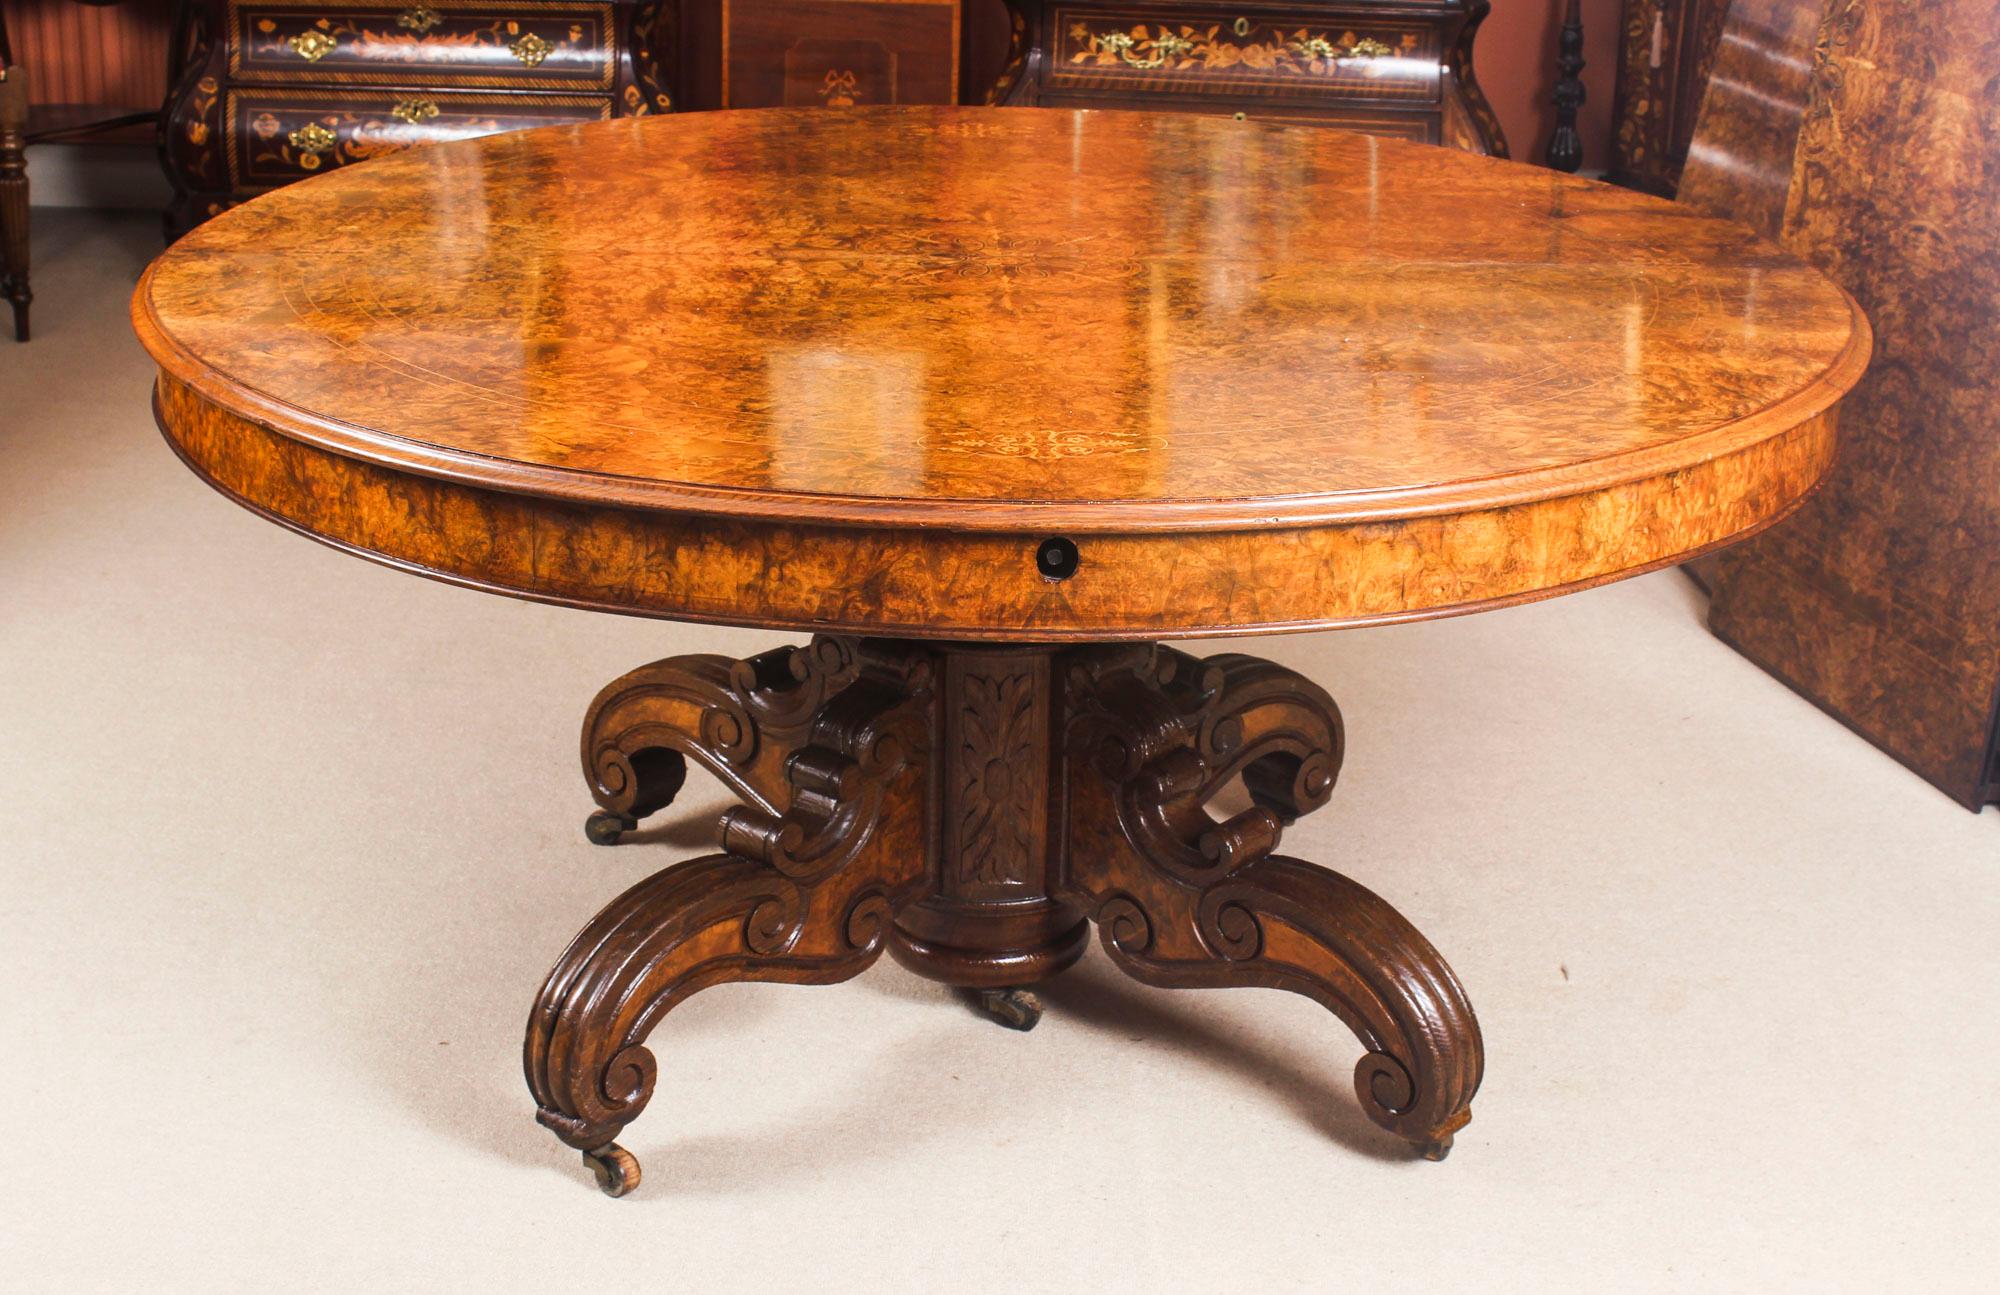 Late 19th Century Antique Victorian Burr Walnut Marquetry Inlaid Dining Table 19th Century